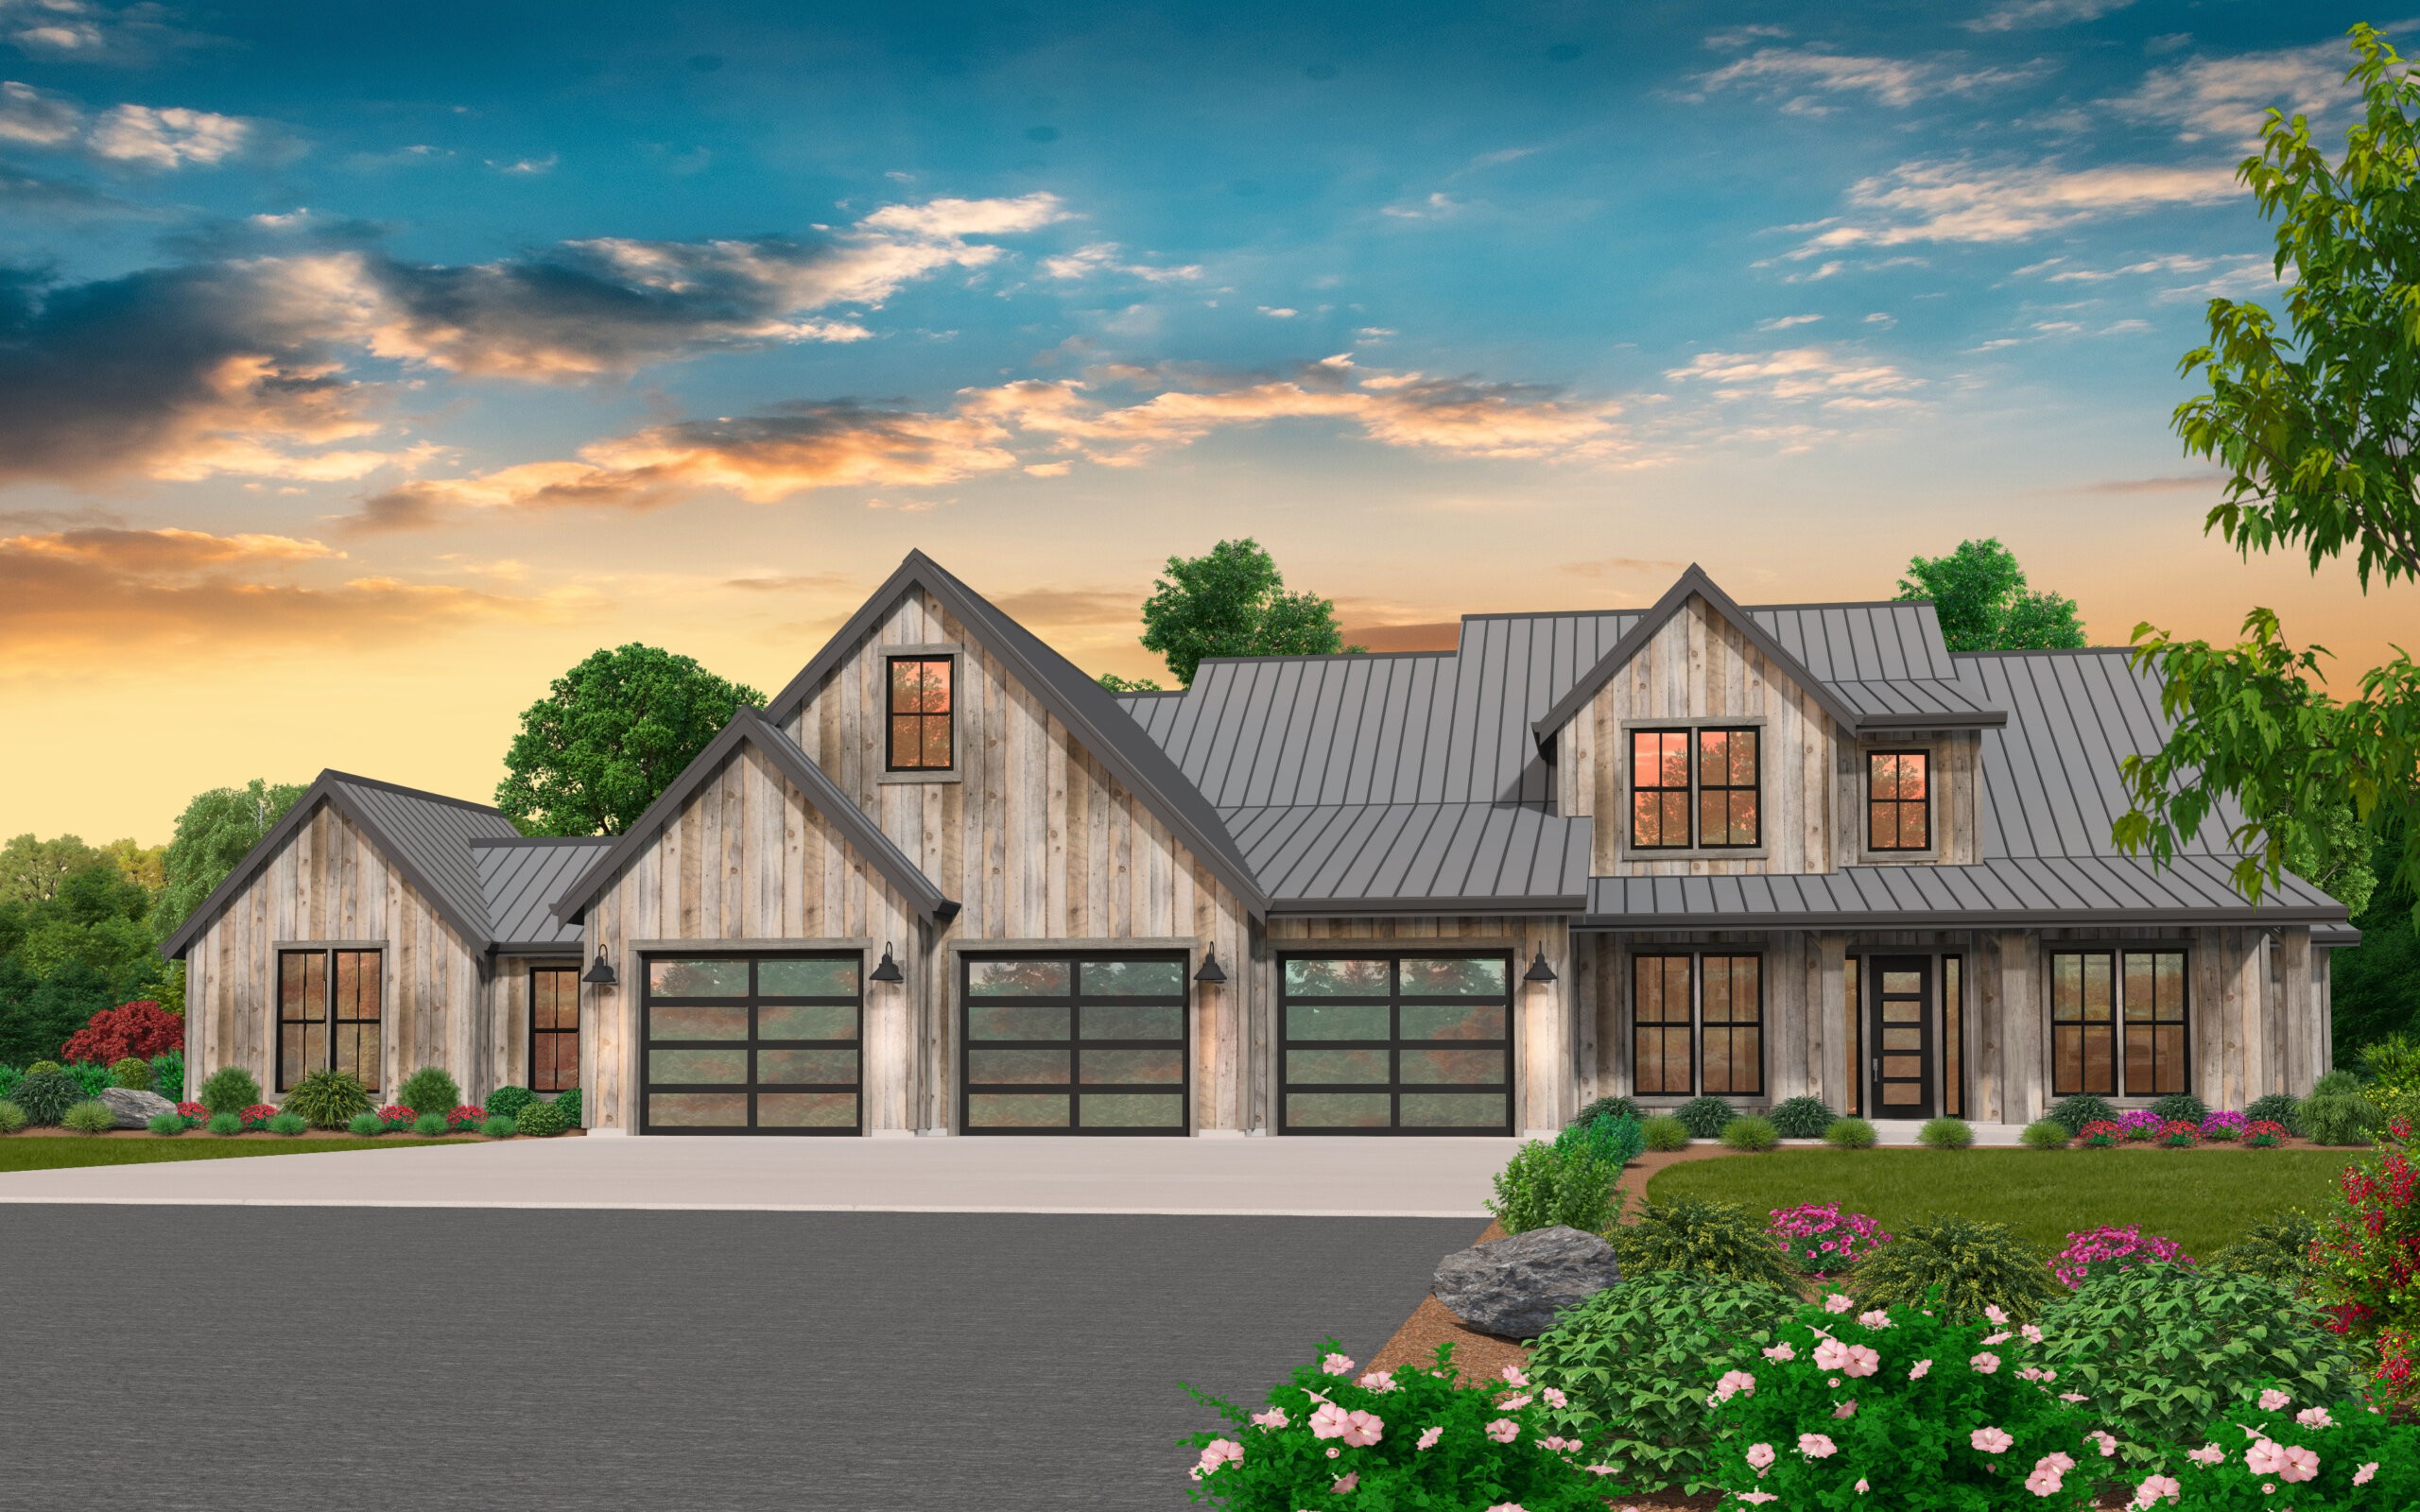 MB 3850 SHAMROCK RUSTIC FARMHOUSE ONE STORY WITH ADU FRONT VIEW BARN Scaled 